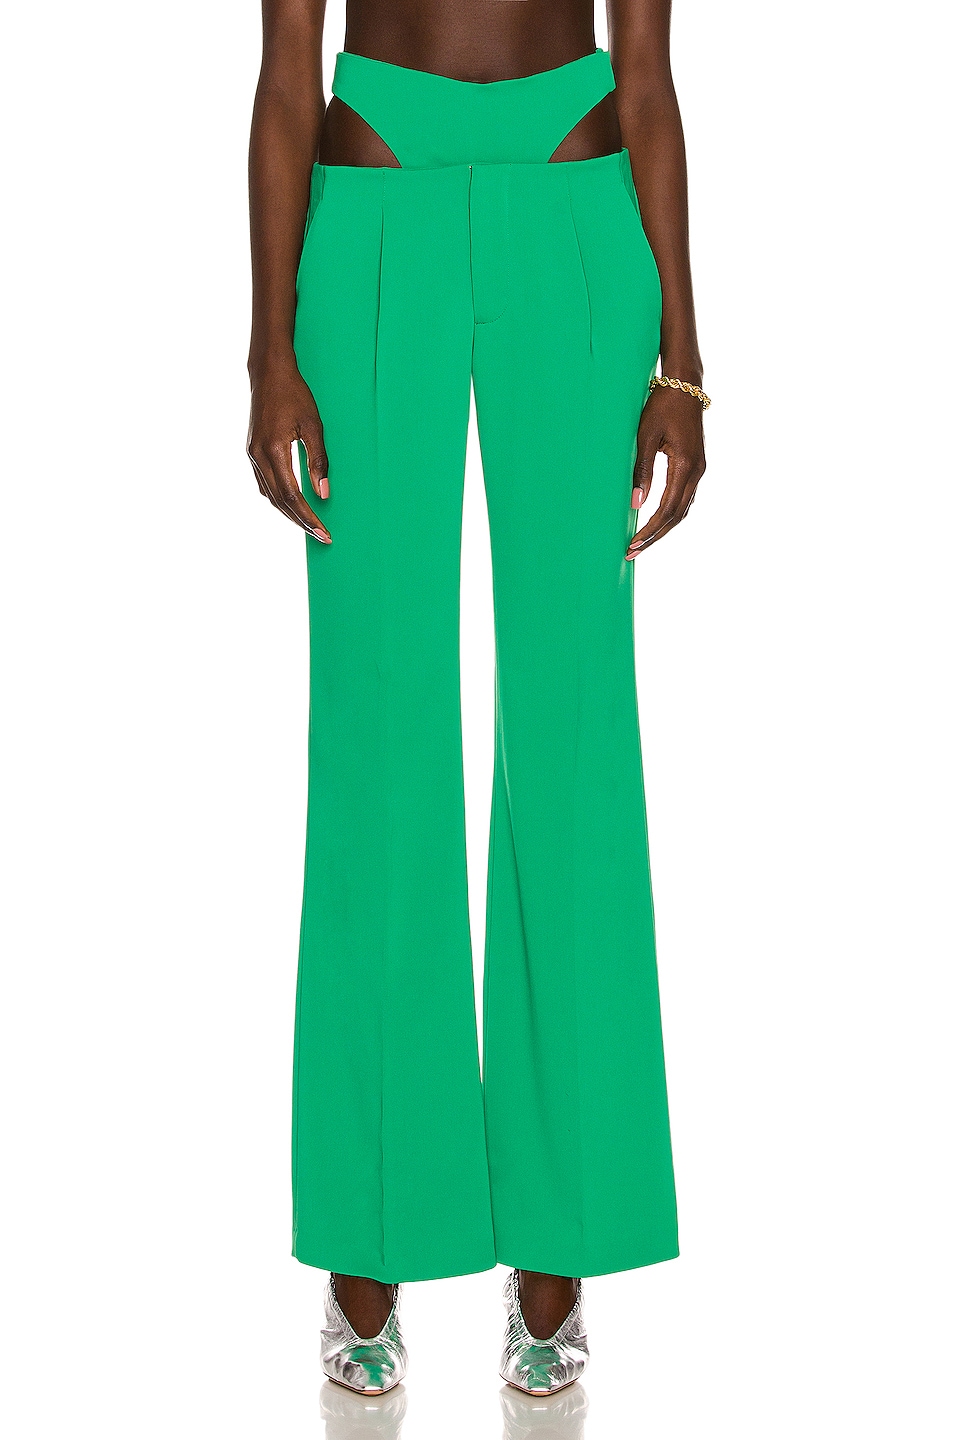 Image 1 of KENDRA DUPLANTIER x FWRD Bassi Lowrider Pant in Green